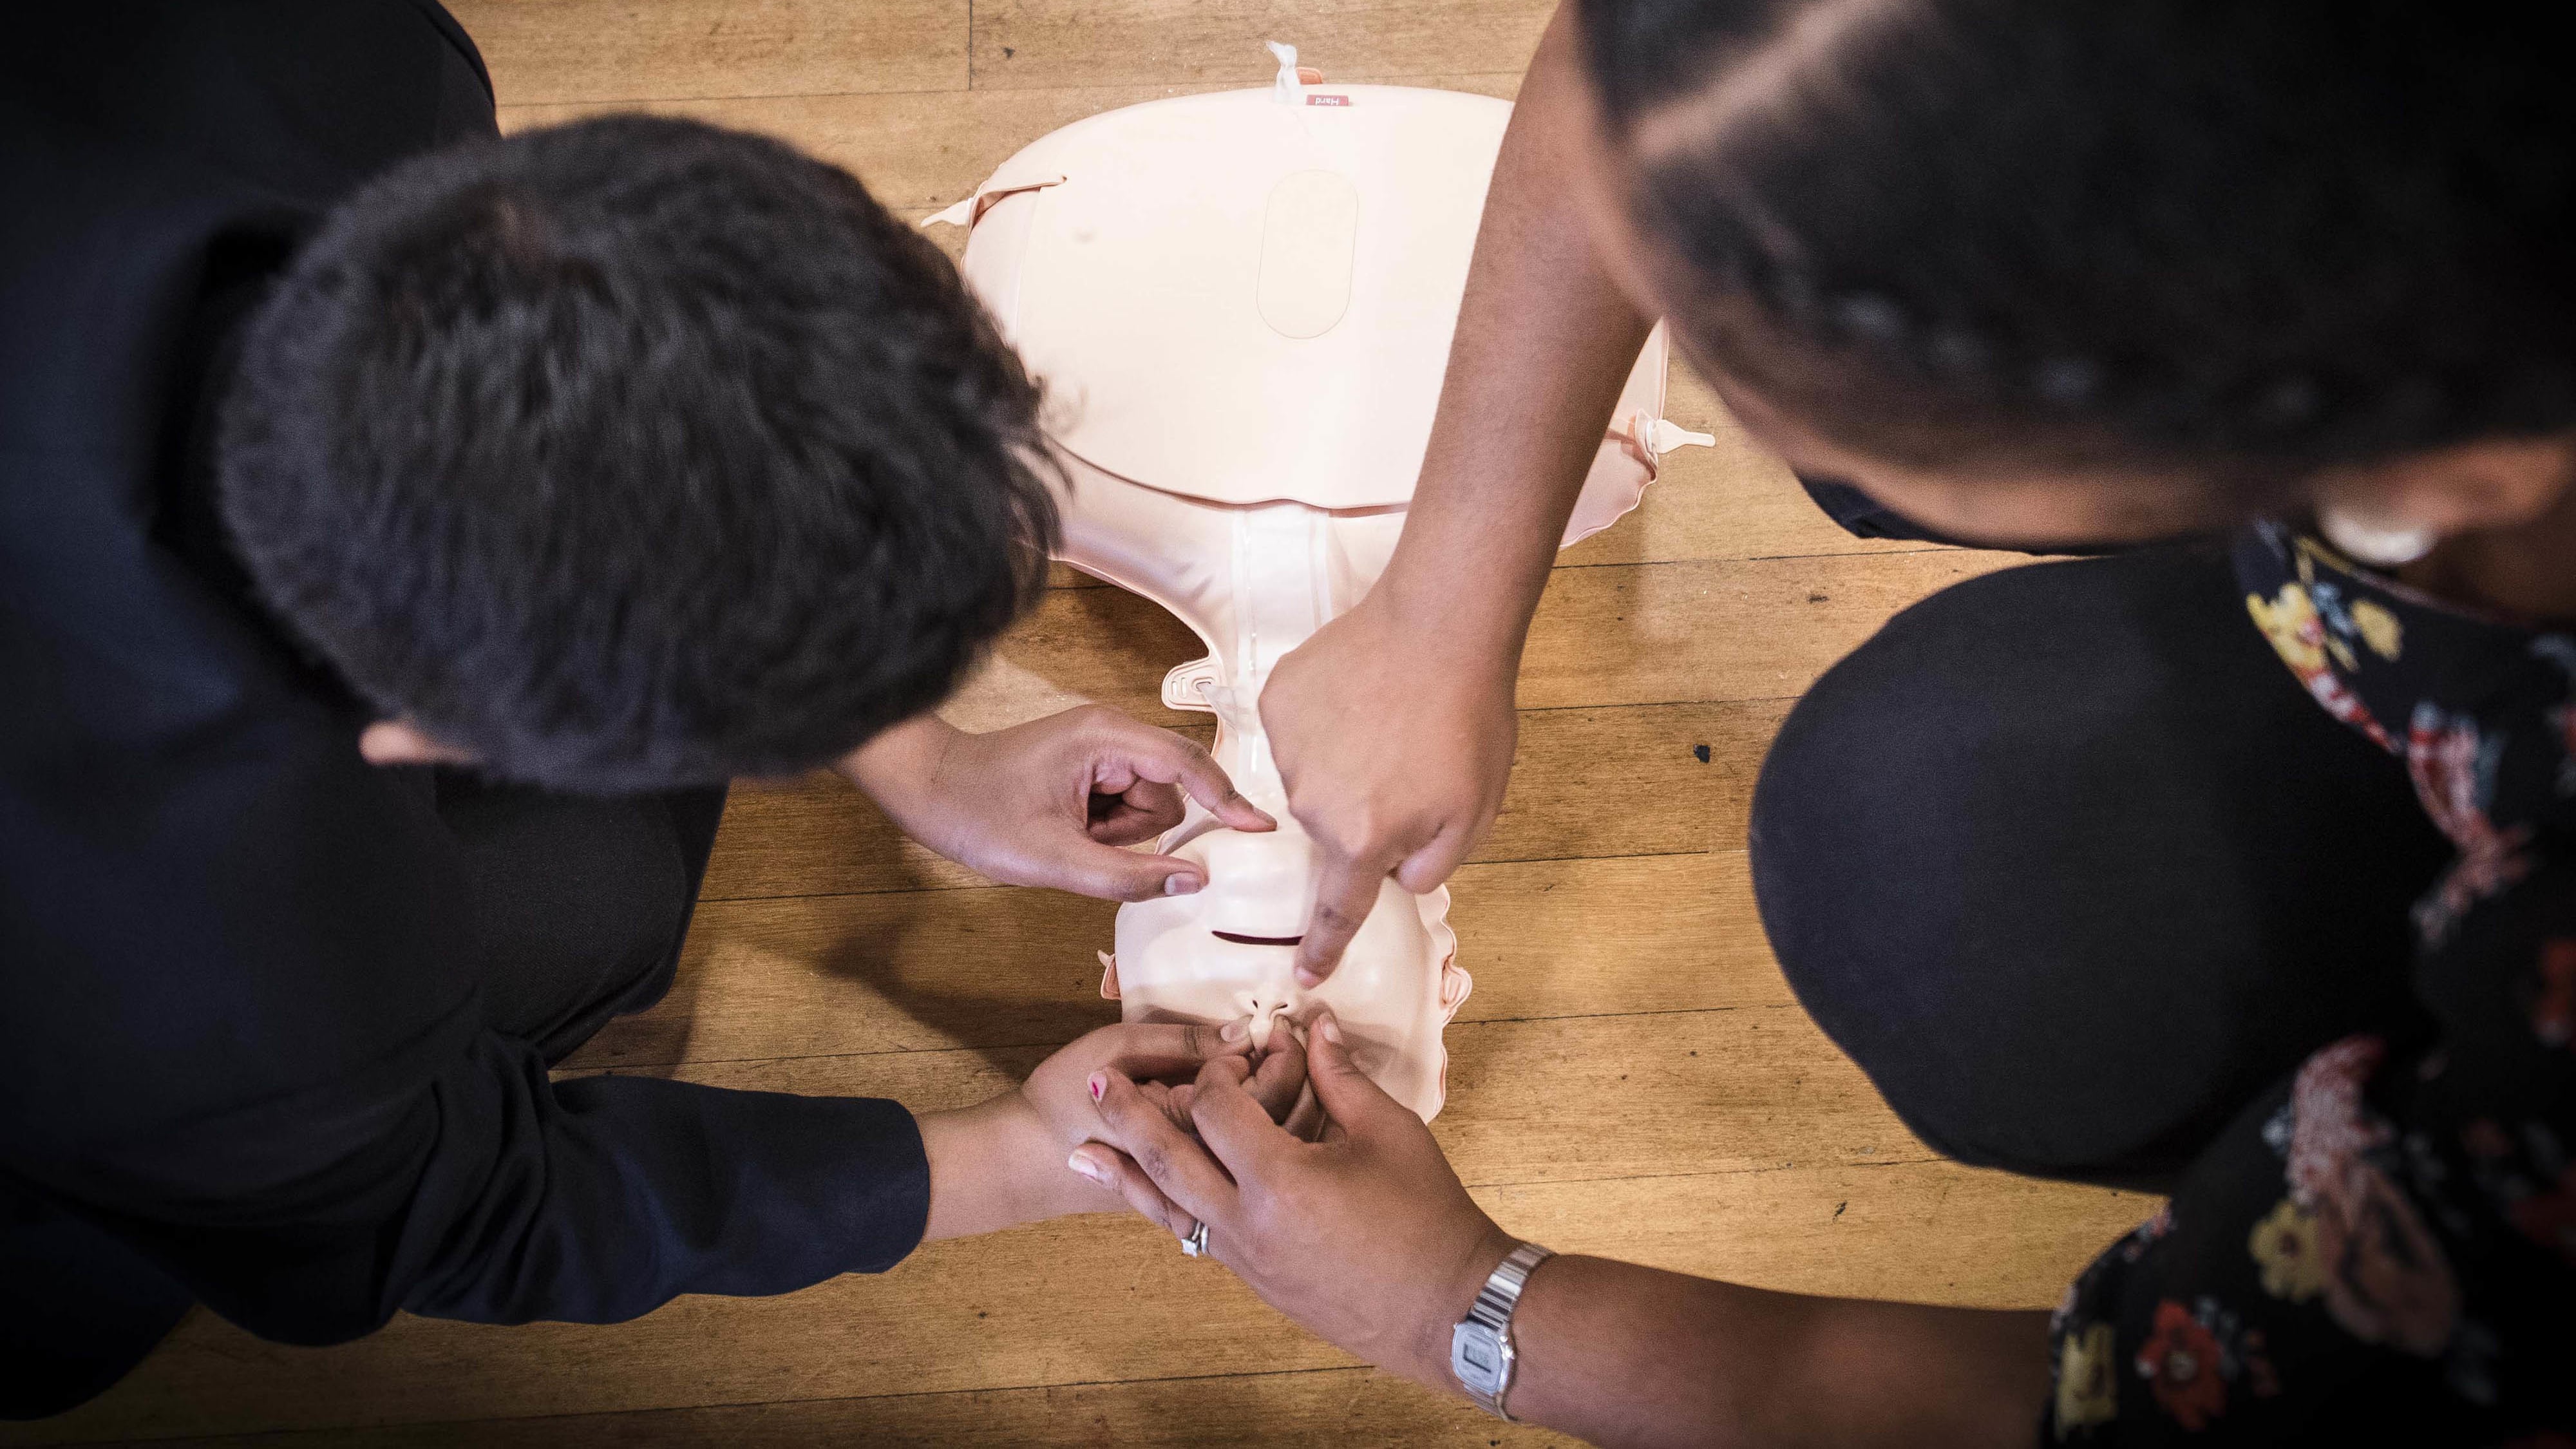 The British Heart Foundation is urging people to use its online tool to learn CPR